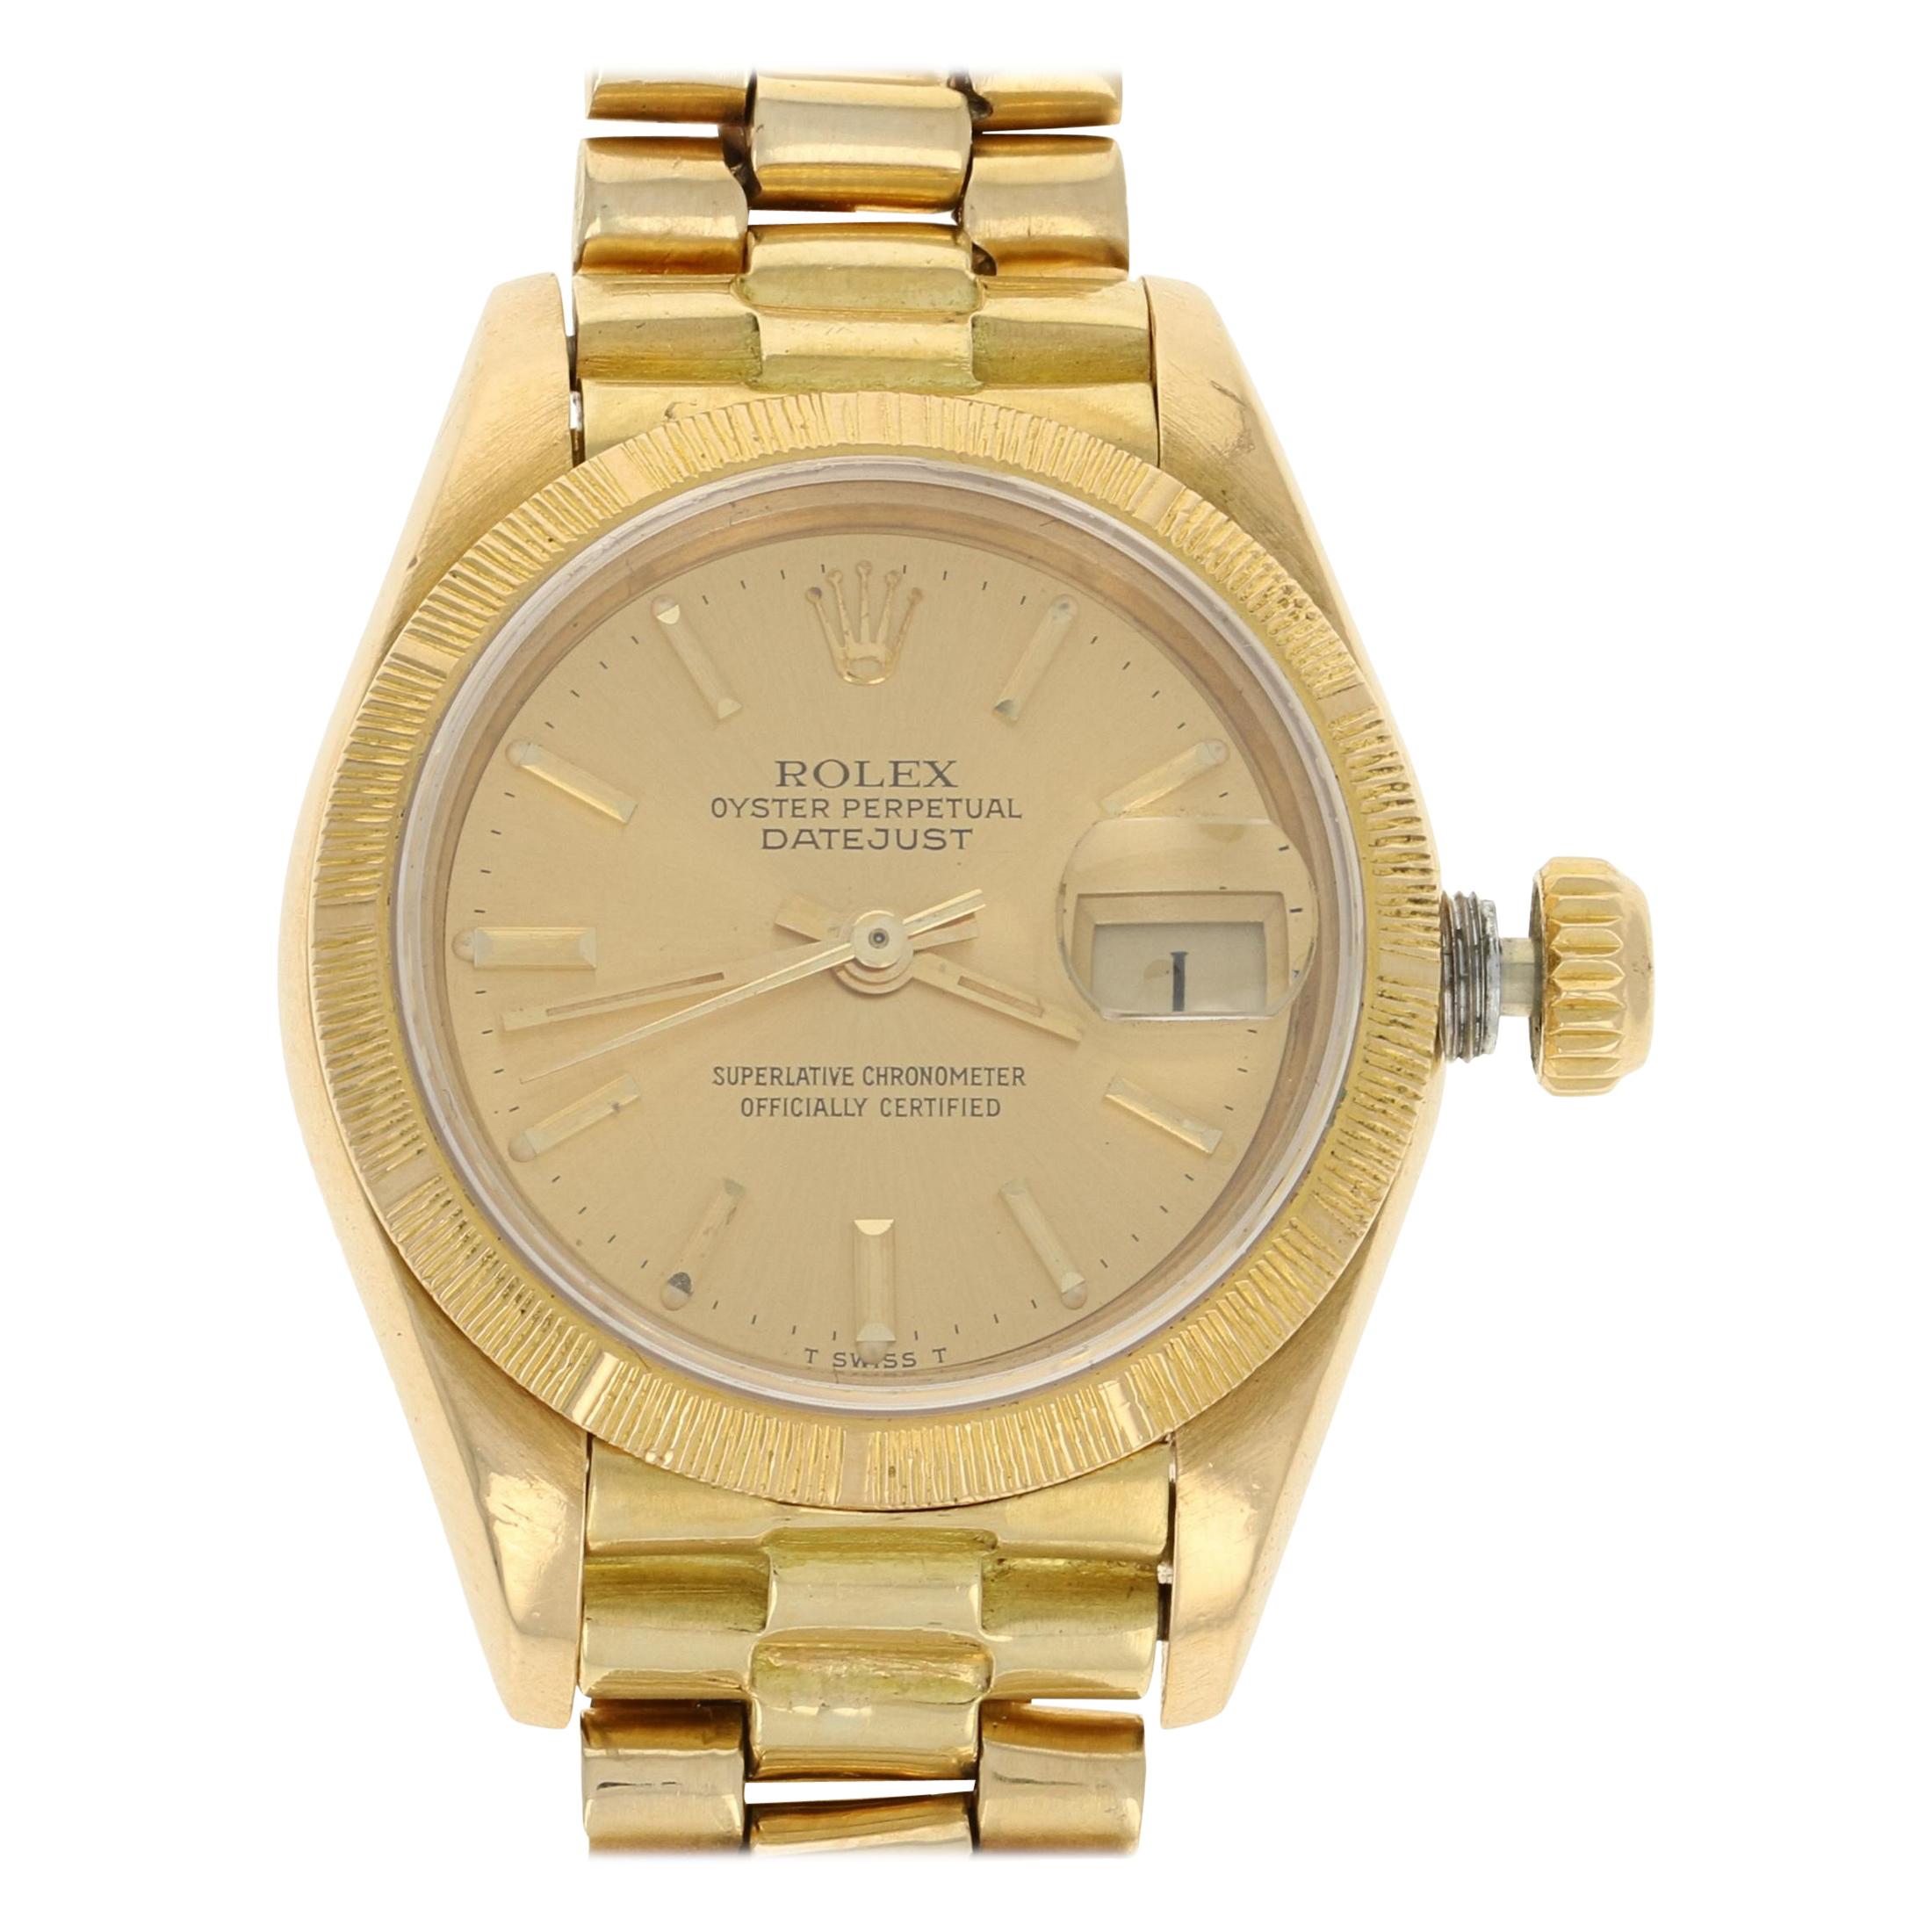 Rolex Geneve Swiss Made Rolex 18k 750 - For Sale on 1stDibs | 78488 rolex  geneve swiss made 18k 750 price, rolex geneve swiss made 18k 750 price  78488, rolex 750 18k geneve